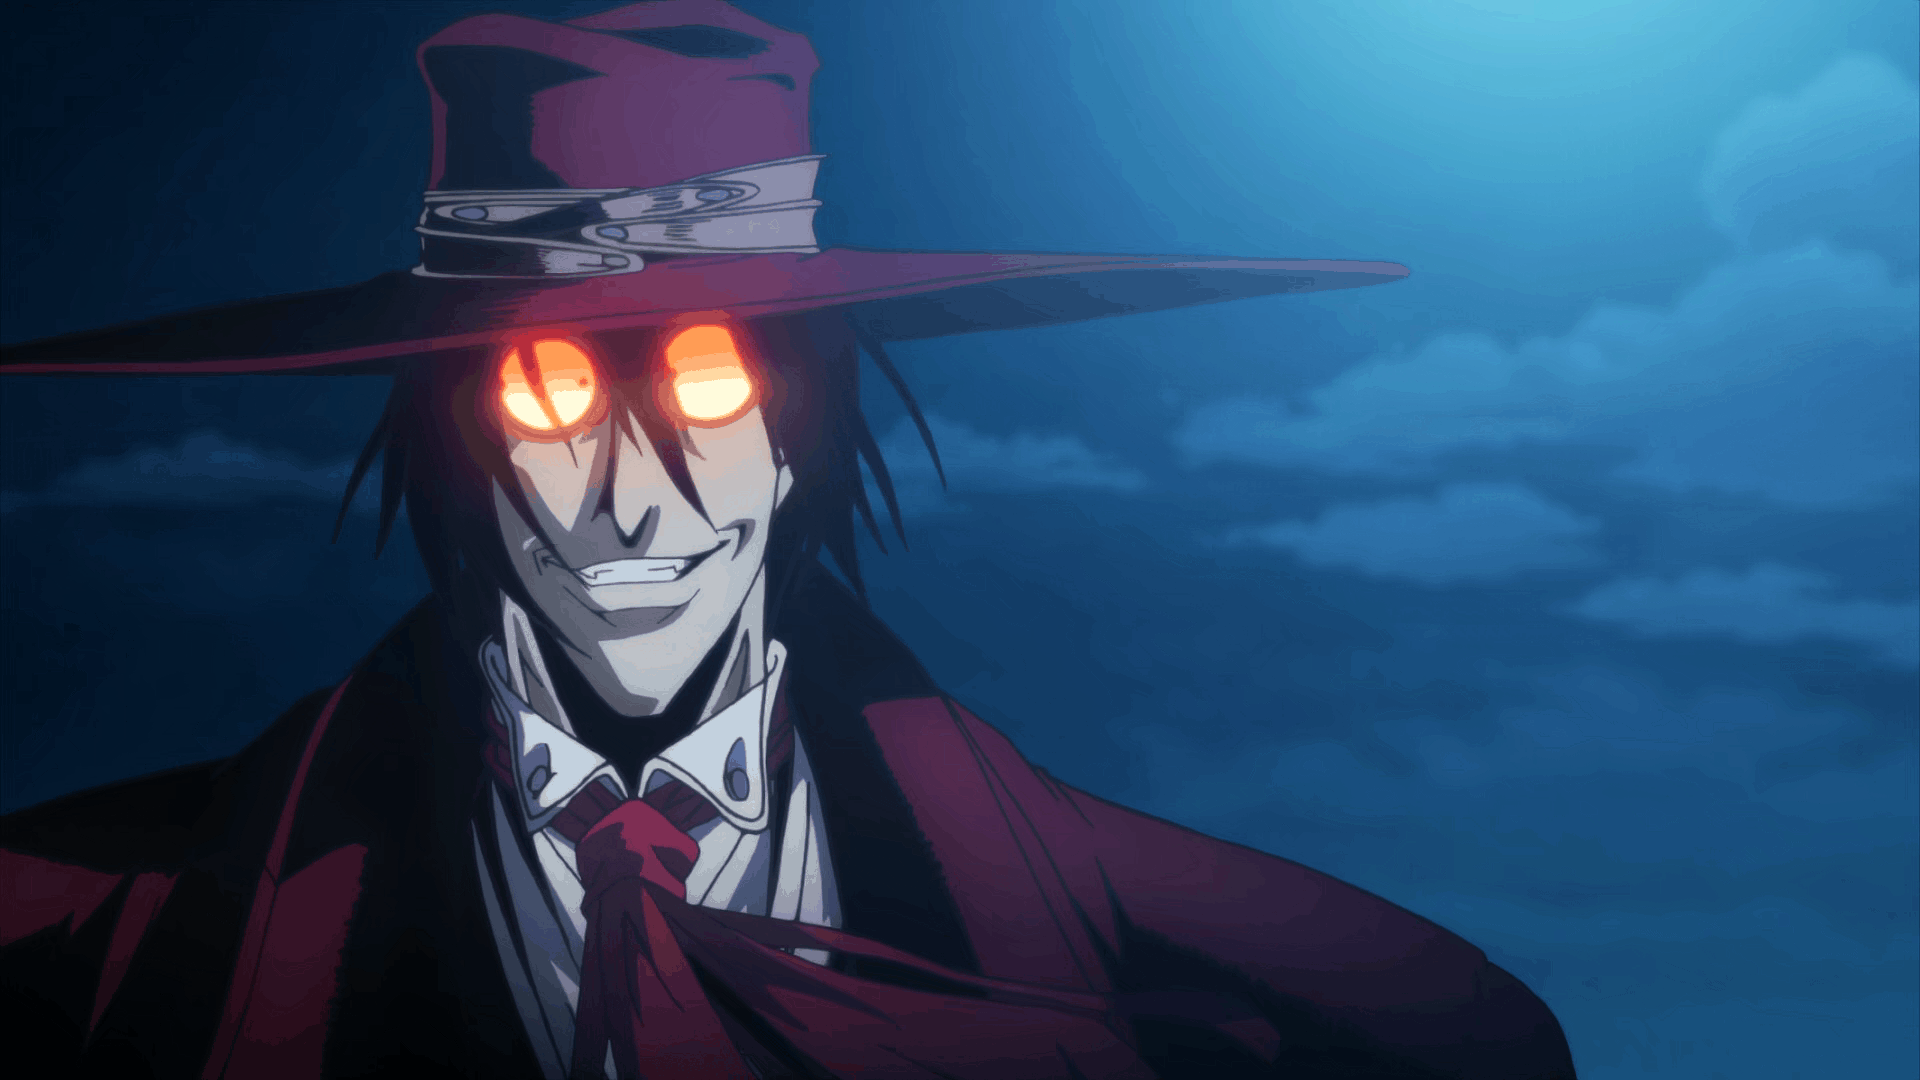 Just watched Hellsing The Dawn and got confused when Drifters showed  up is that any correlation between those two  9GAG